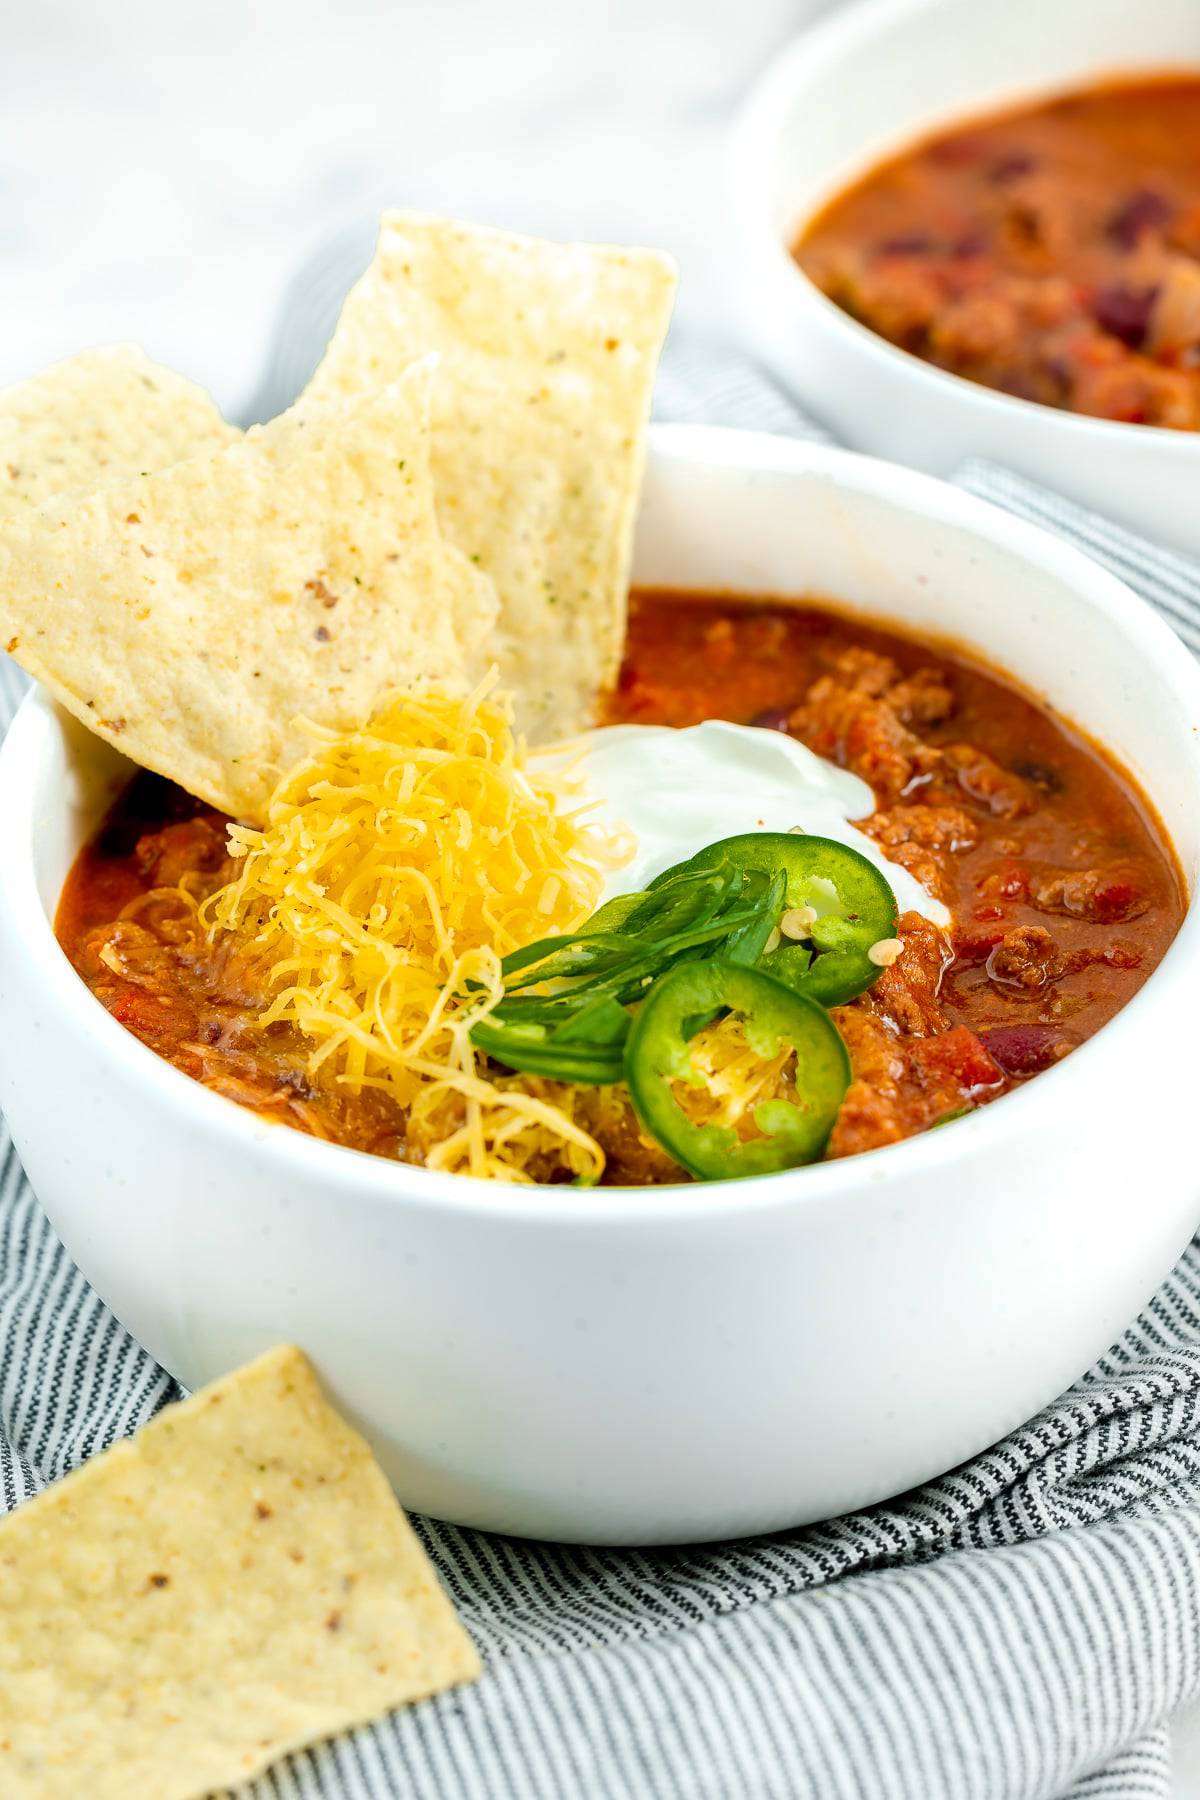 Texas roadhouse chilli in a bowl, garnished with tortilla chips and fixings.